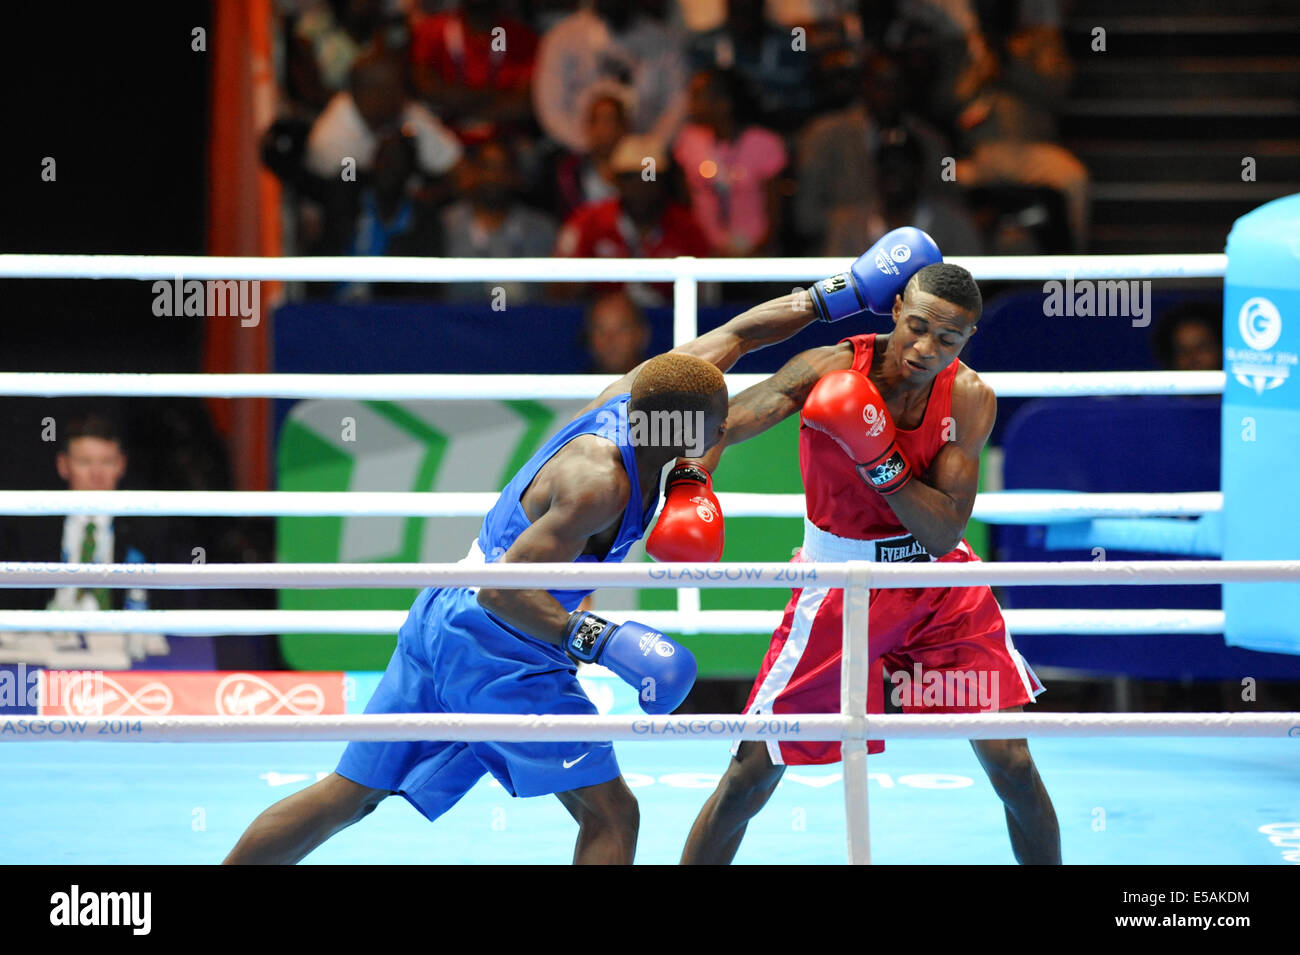 Merven Clair (MRI, red) and Rayton Okwiri (KEN, blue) boxing during the preliminary matches of the boxing competitions at the XX Commonwealth Games, Glasgow. The match was won by Rayton Okwiri. Stock Photo